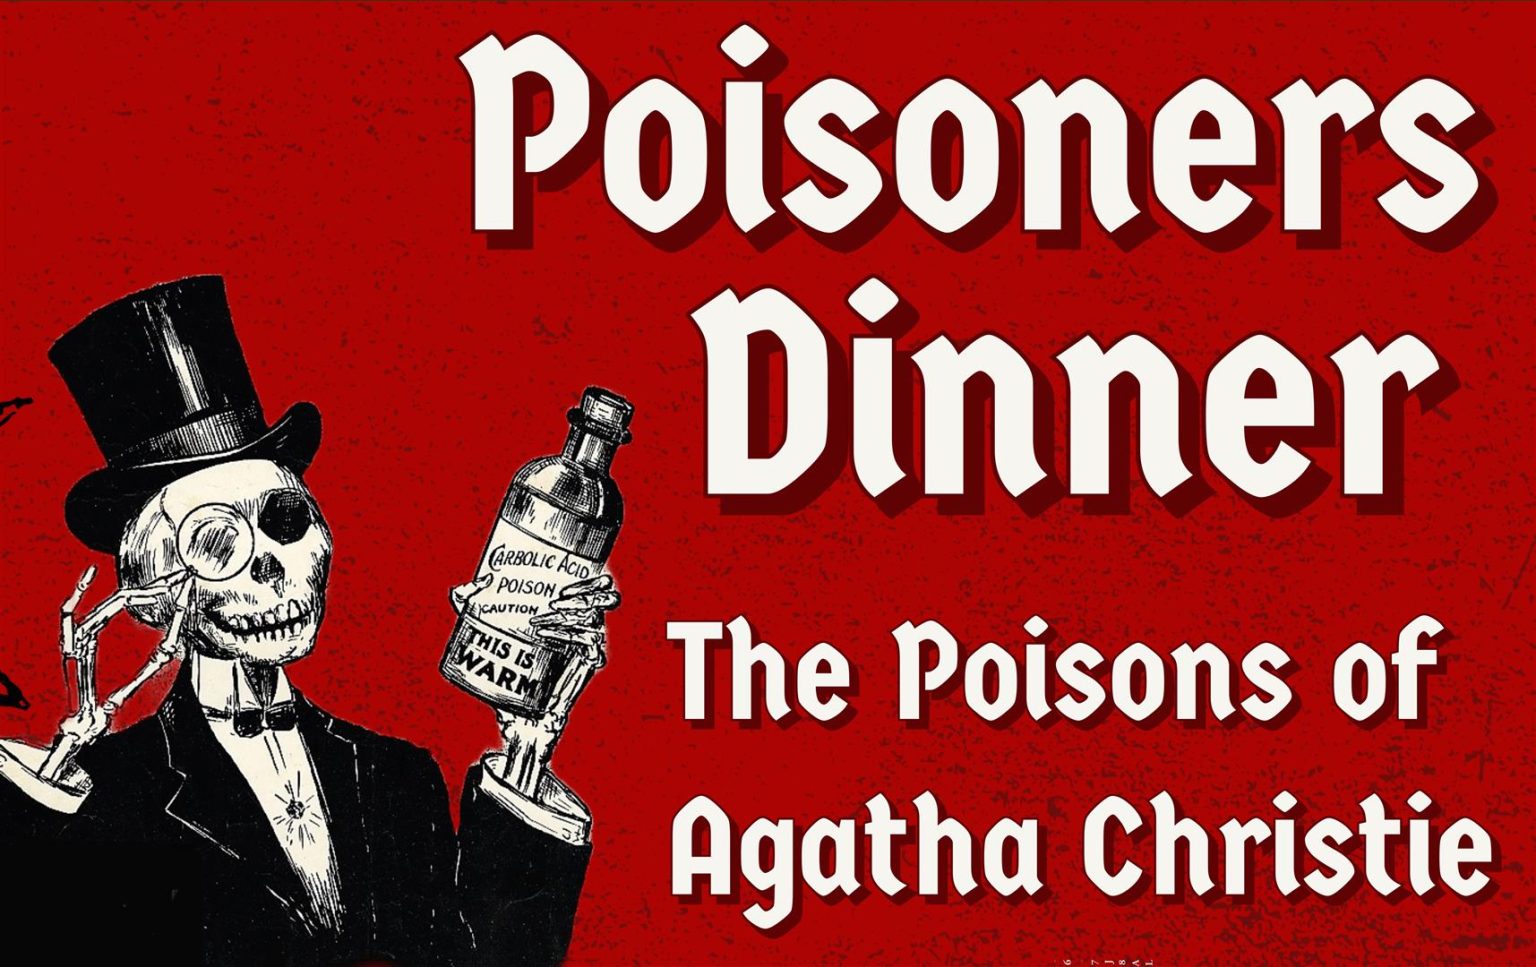 "Poisoners Dinner" with Dr Kathryn Harkup, best-selling author of A is for Arsenic: The Poisons of Agatha Christie